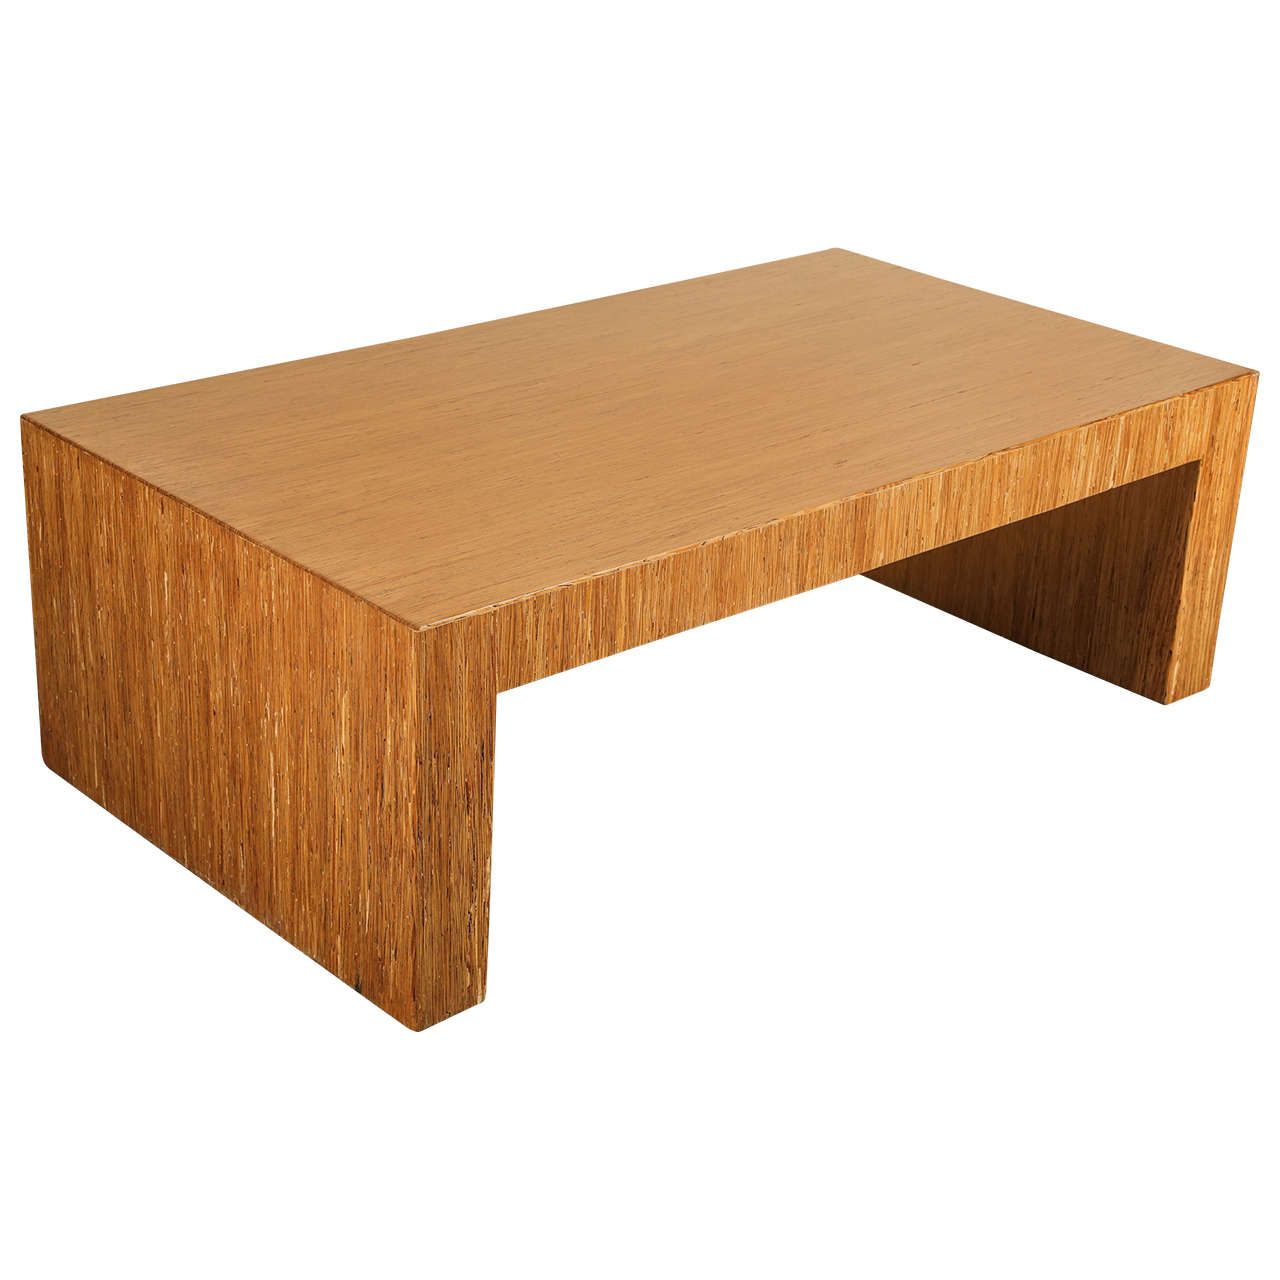 Simple Minimalist Coffee Table With Striated Wood Veneer At 1stdibs Within Simple Design Coffee Tables (View 5 of 15)